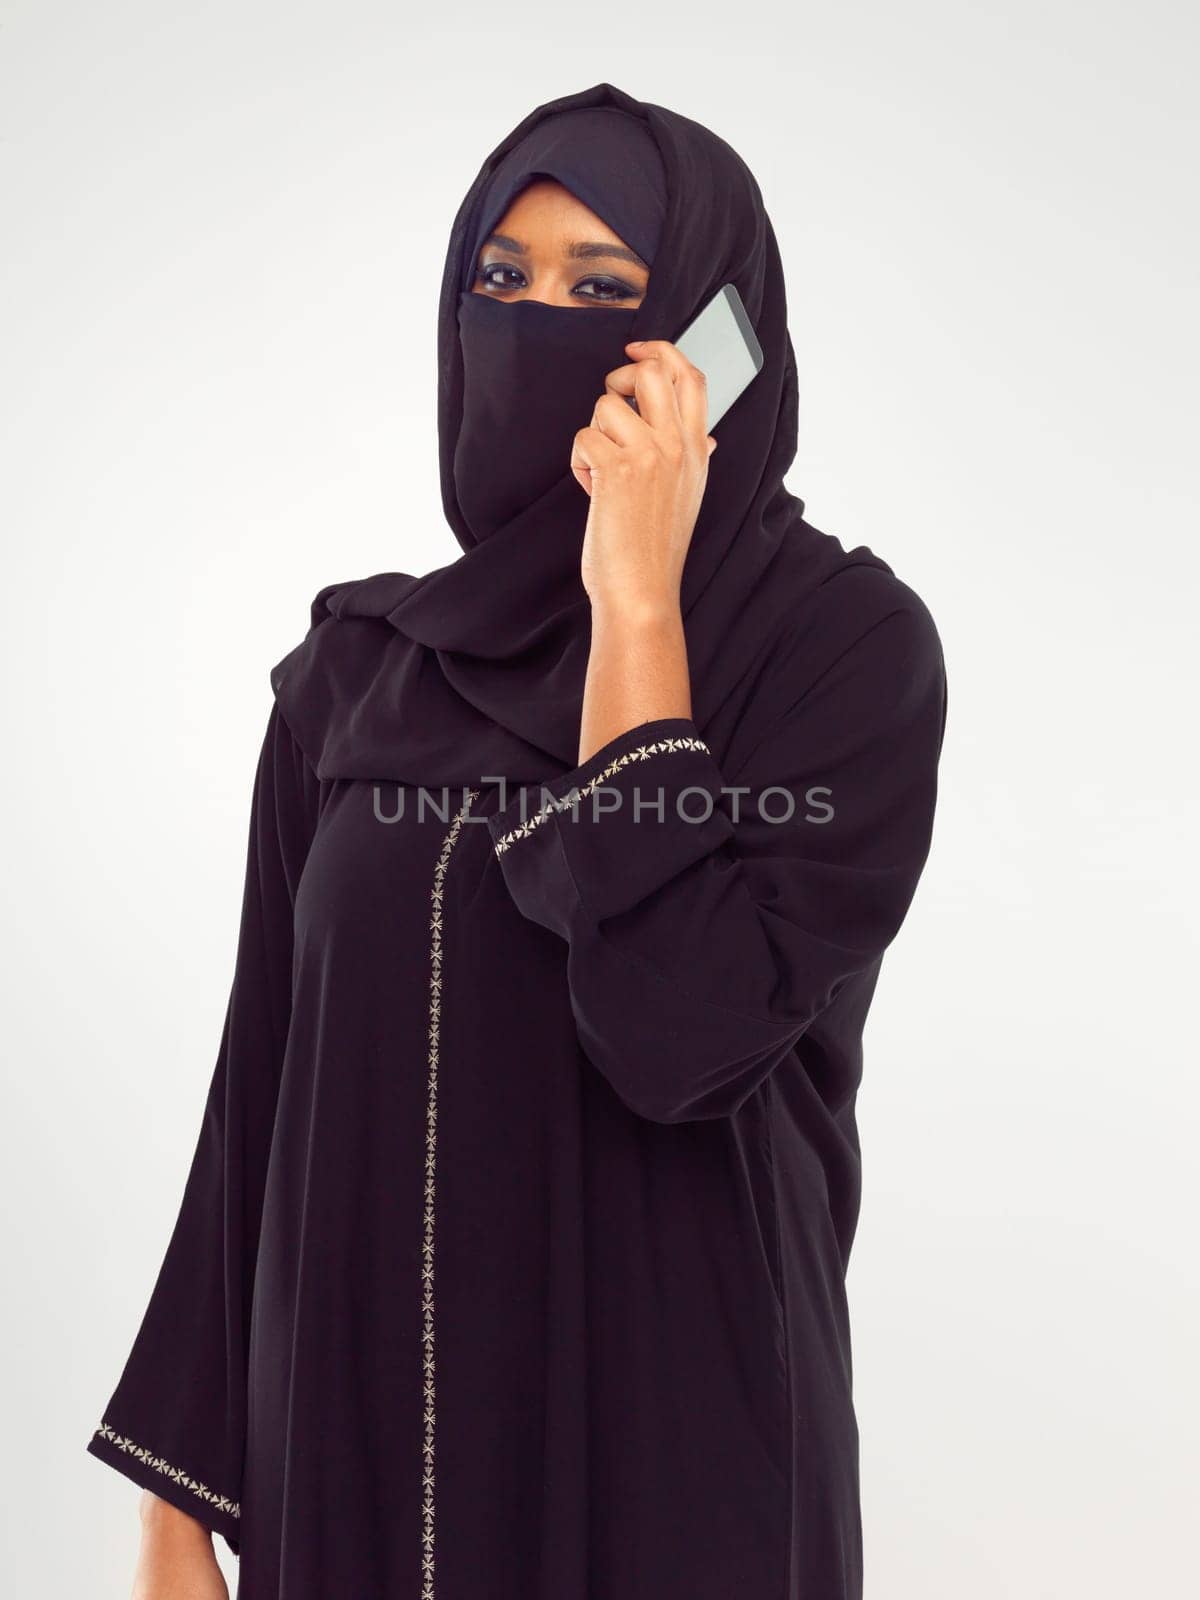 Muslim woman on a phone call in studio global, international communication of culture and design. Islam, arabic and traditional model talking on smartphone for networking isolated on white background.